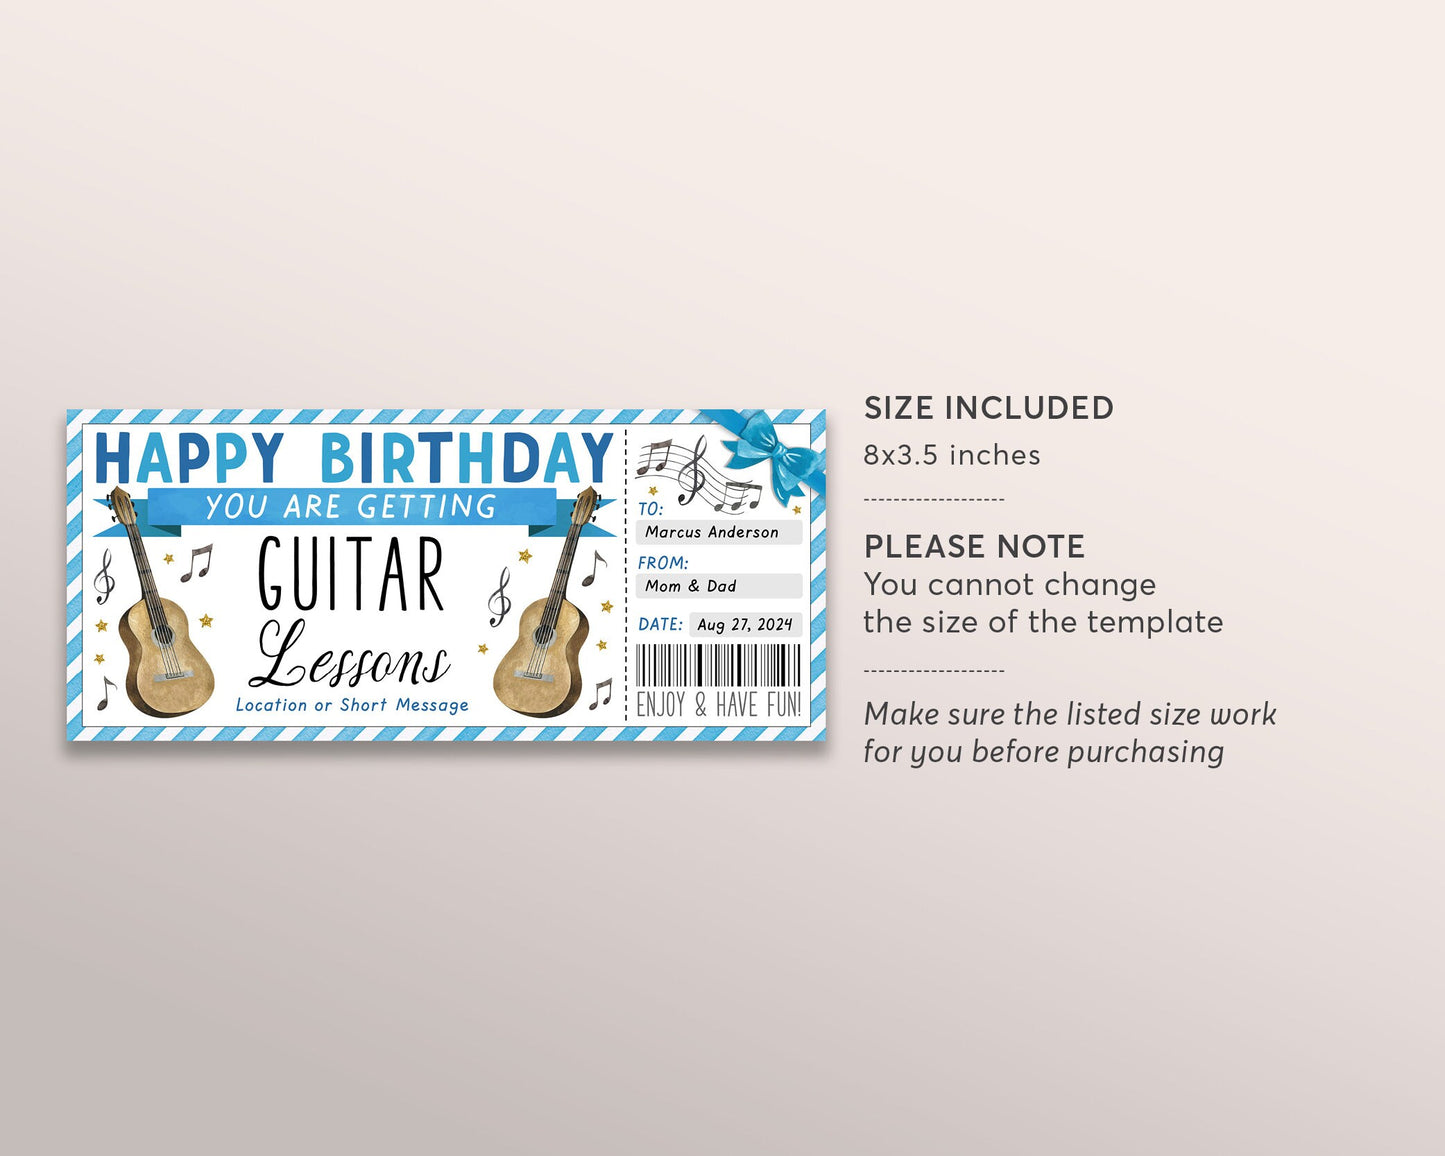 Guitar Lessons Gift Certificate Editable Template, Birthday Surprise Music Guitar Class Voucher Gift Reveal For Him, Learn to Play Coupon